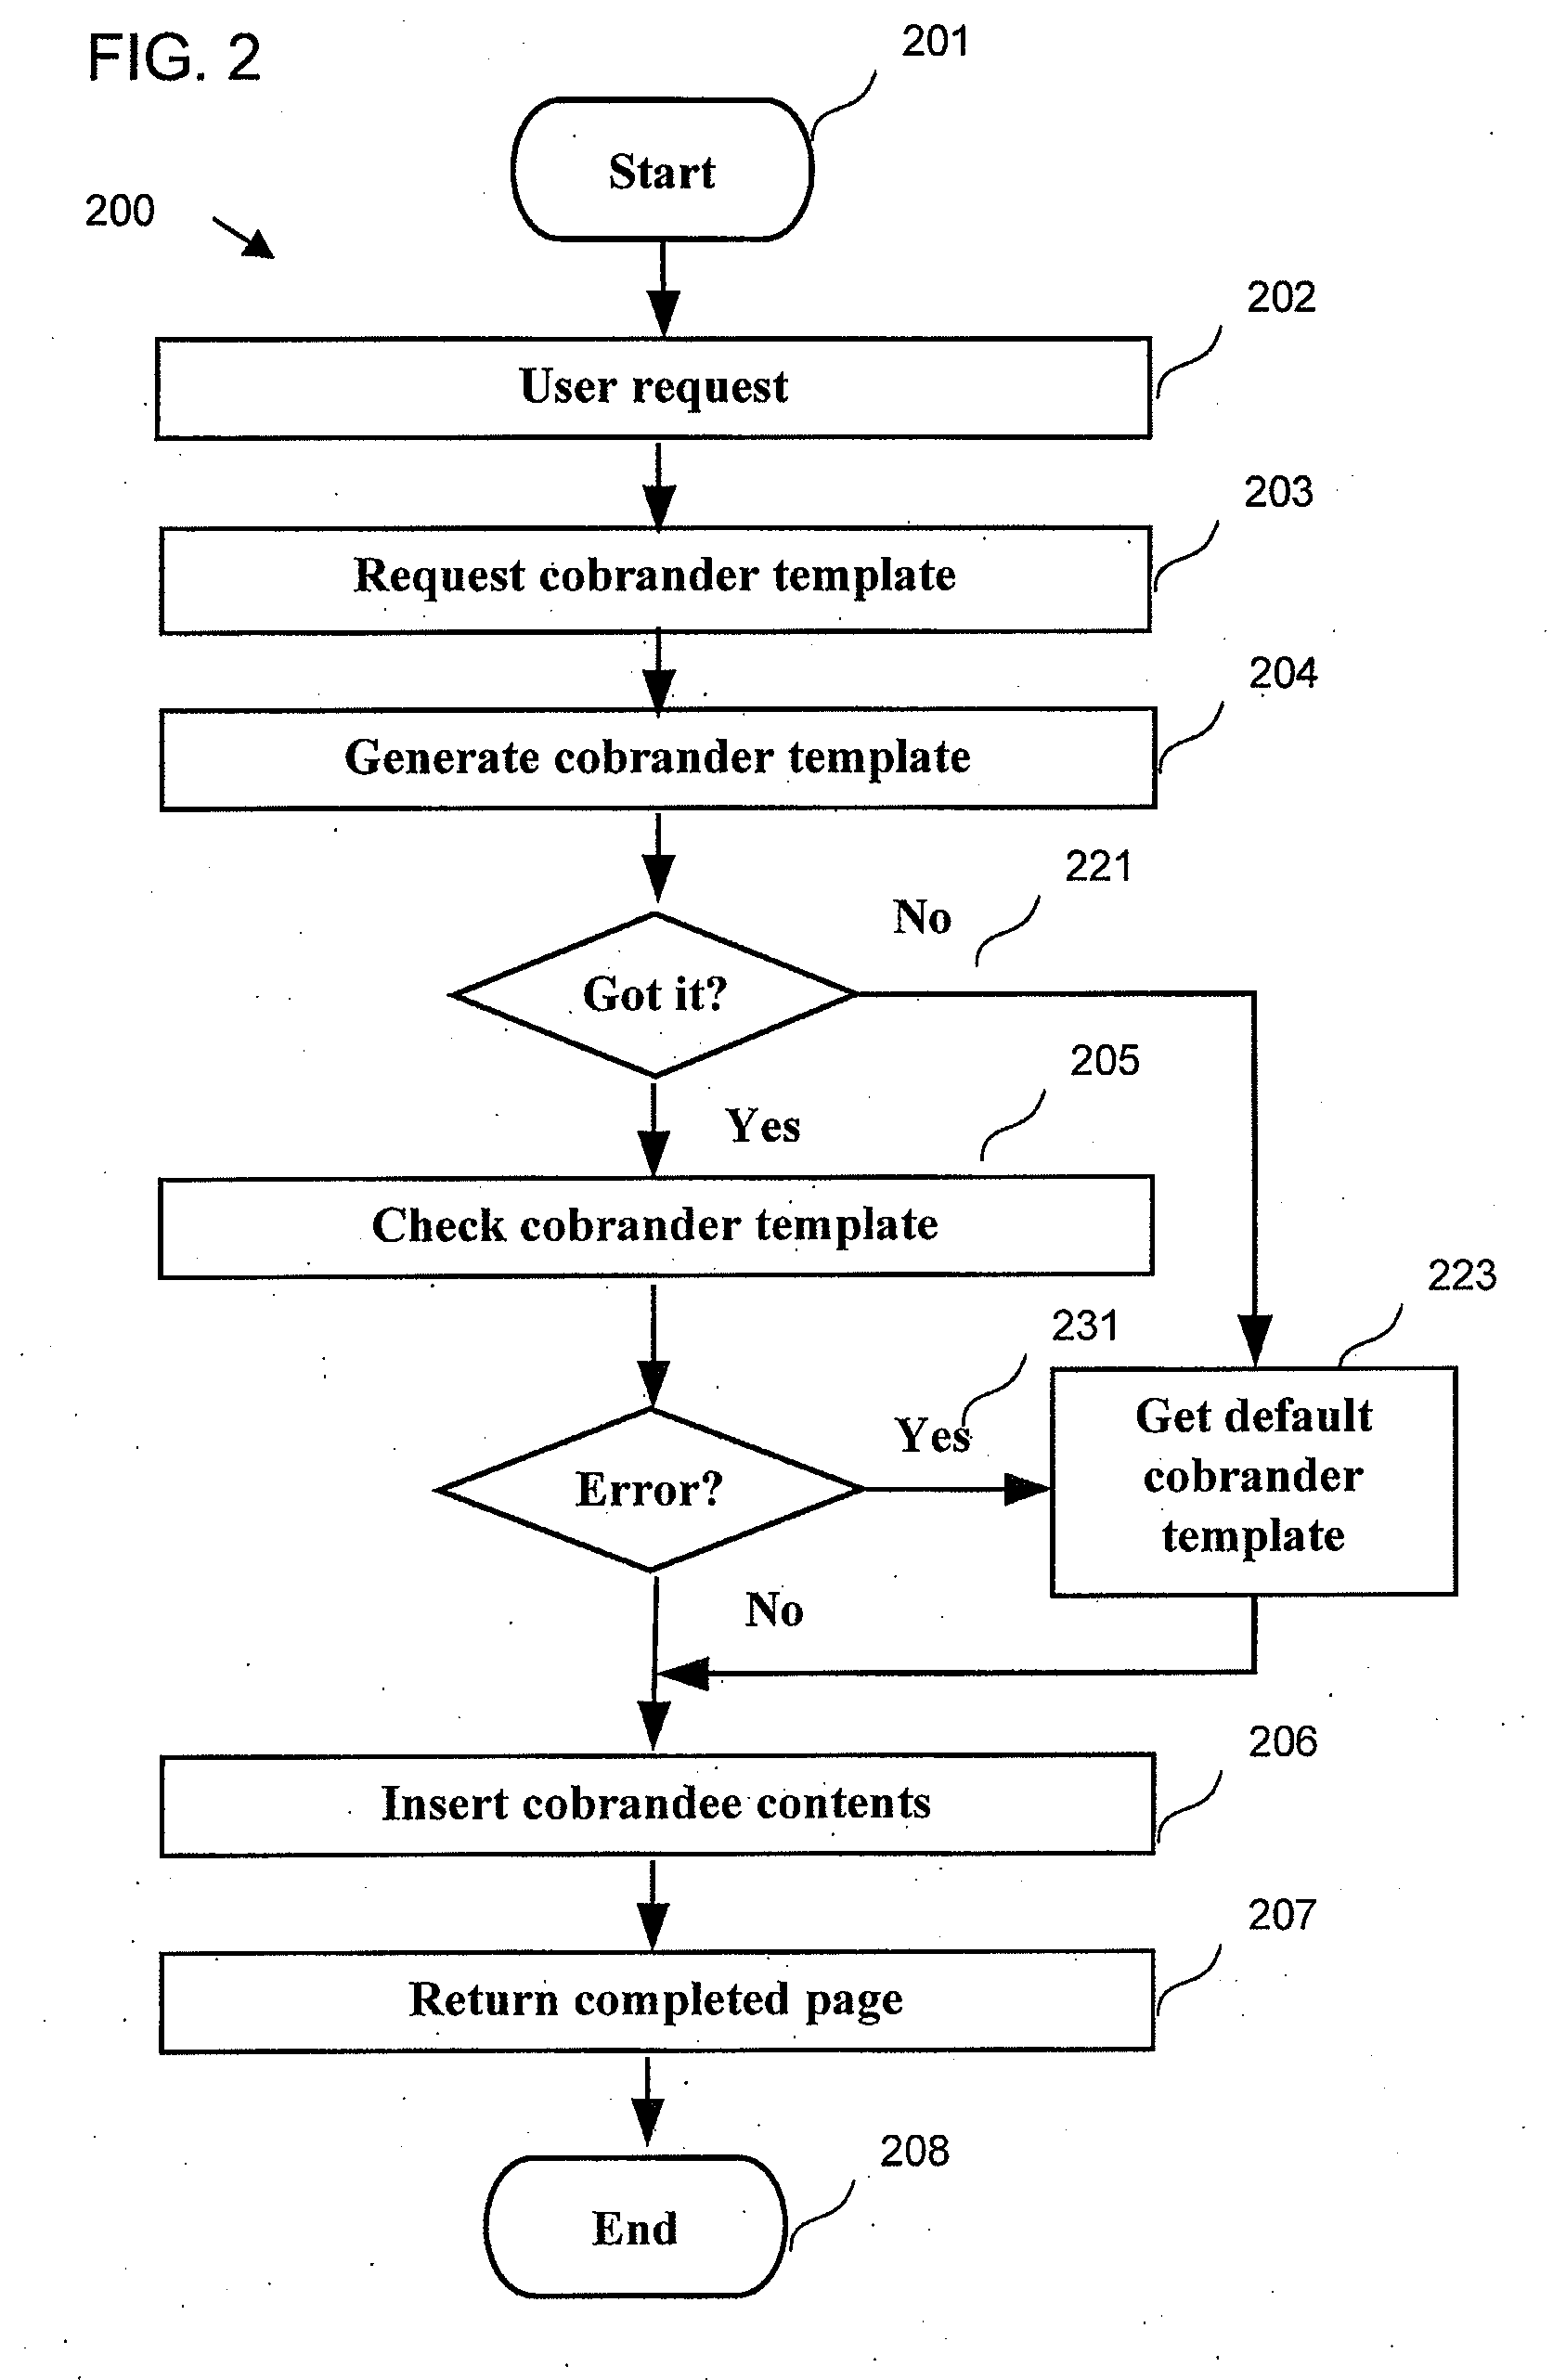 Method for Flexible, Safe, Robust, and Efficient Generation and Serving of Multi-Source World-Wide Web Content Pages